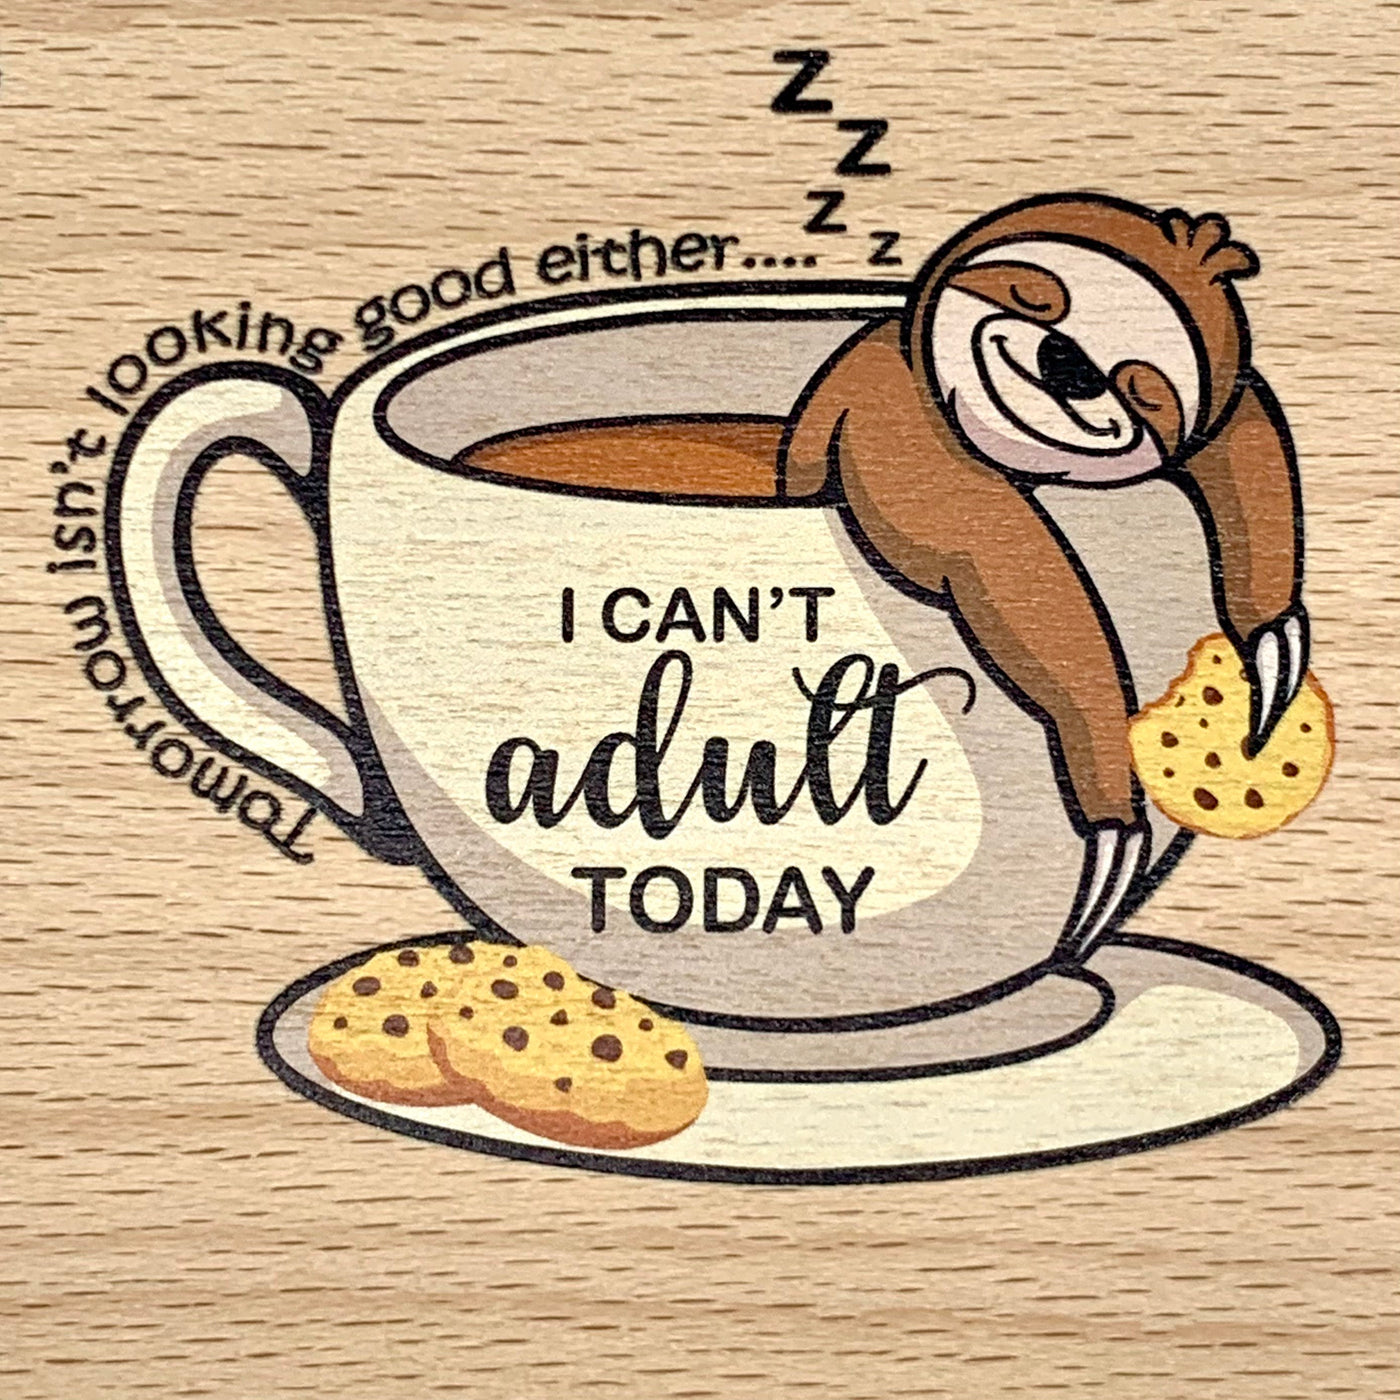 Sloth Can’t Adult Today thread holder floss holder cross stitch organisation